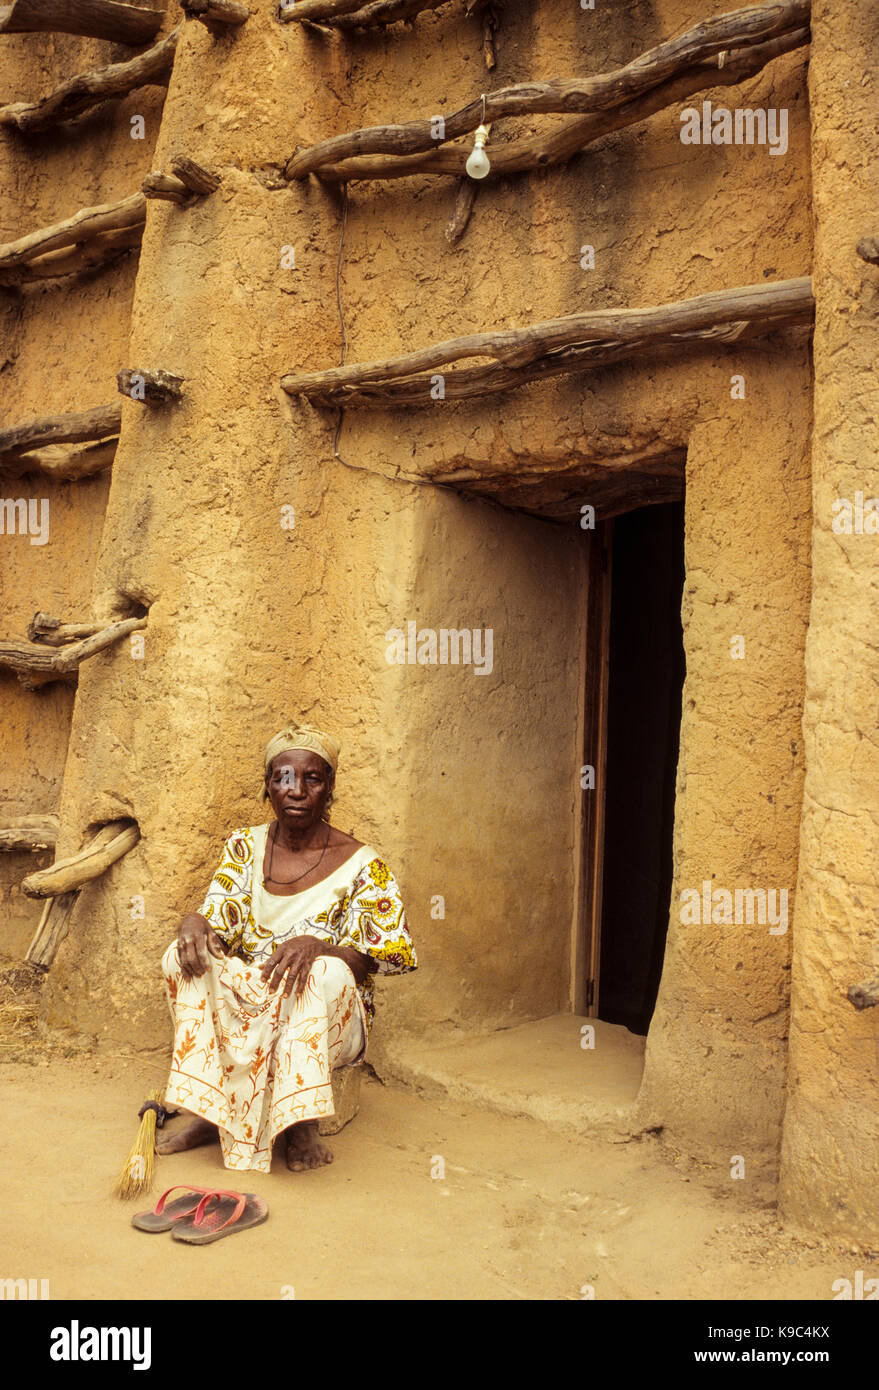 Kong, Ivory Coast, Cote d'Ivoire.  Caretaker of the Main Mosque of Kong. Stock Photo